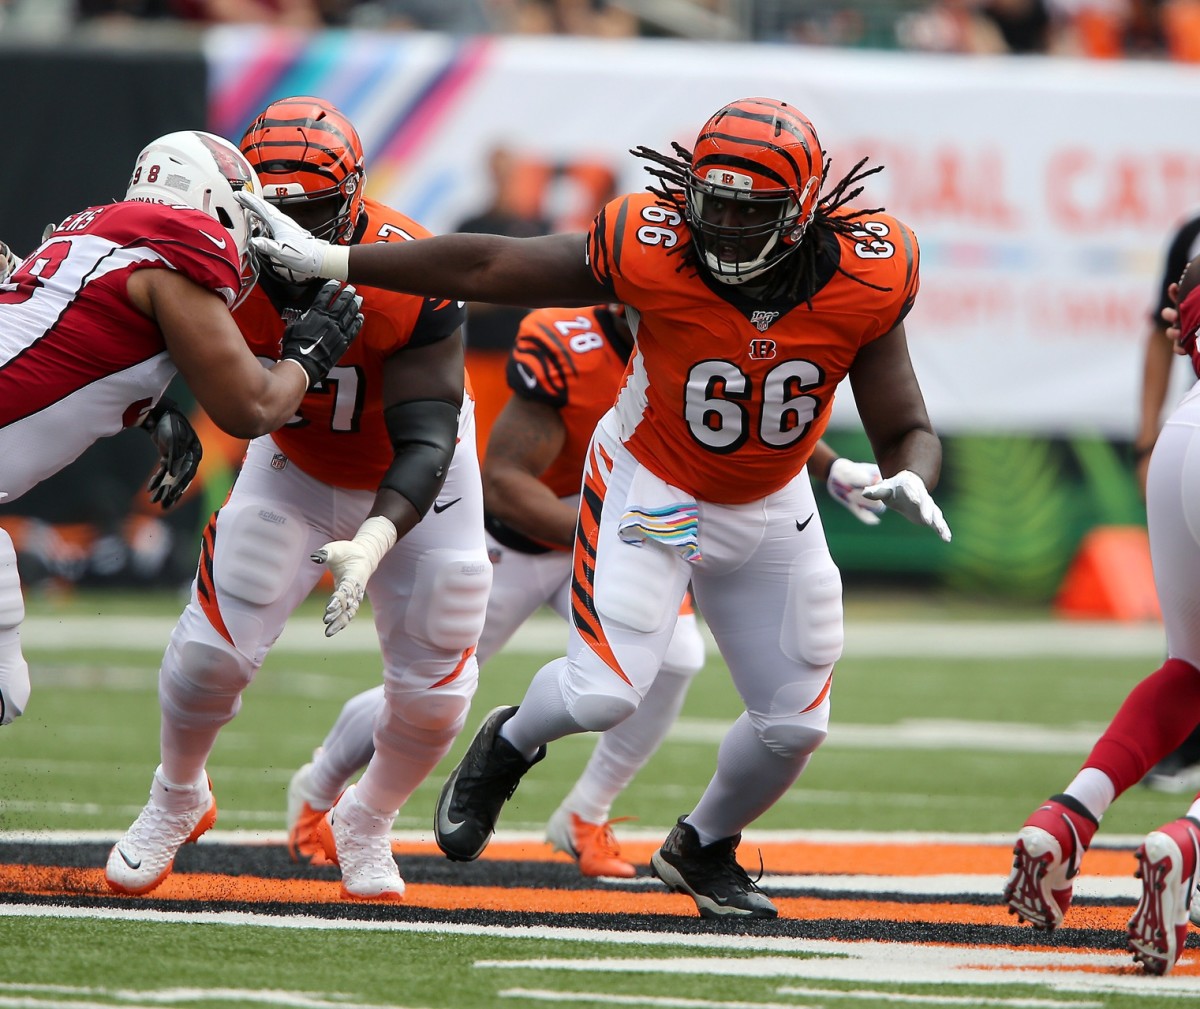 The Bengals are optimistic about offensive line, believe issues can be fixe...